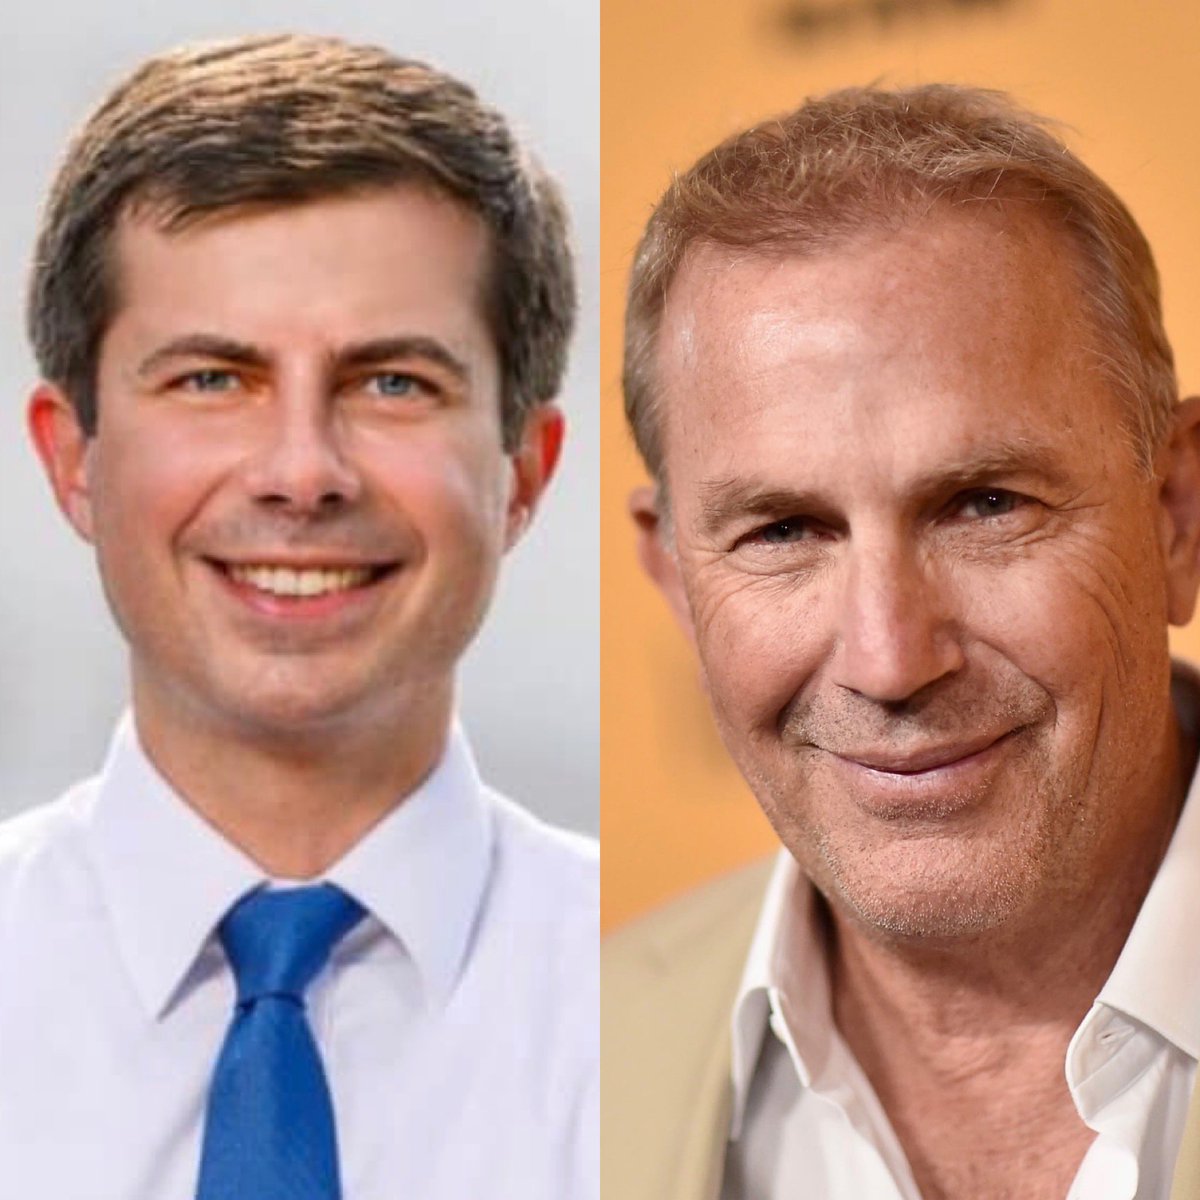 I guess when you are #DancingWithWolves an endorsement by #kevincostner is pretty damn timely! Way to go @PeteButtigieg 
#teampete #PeteForAmerica